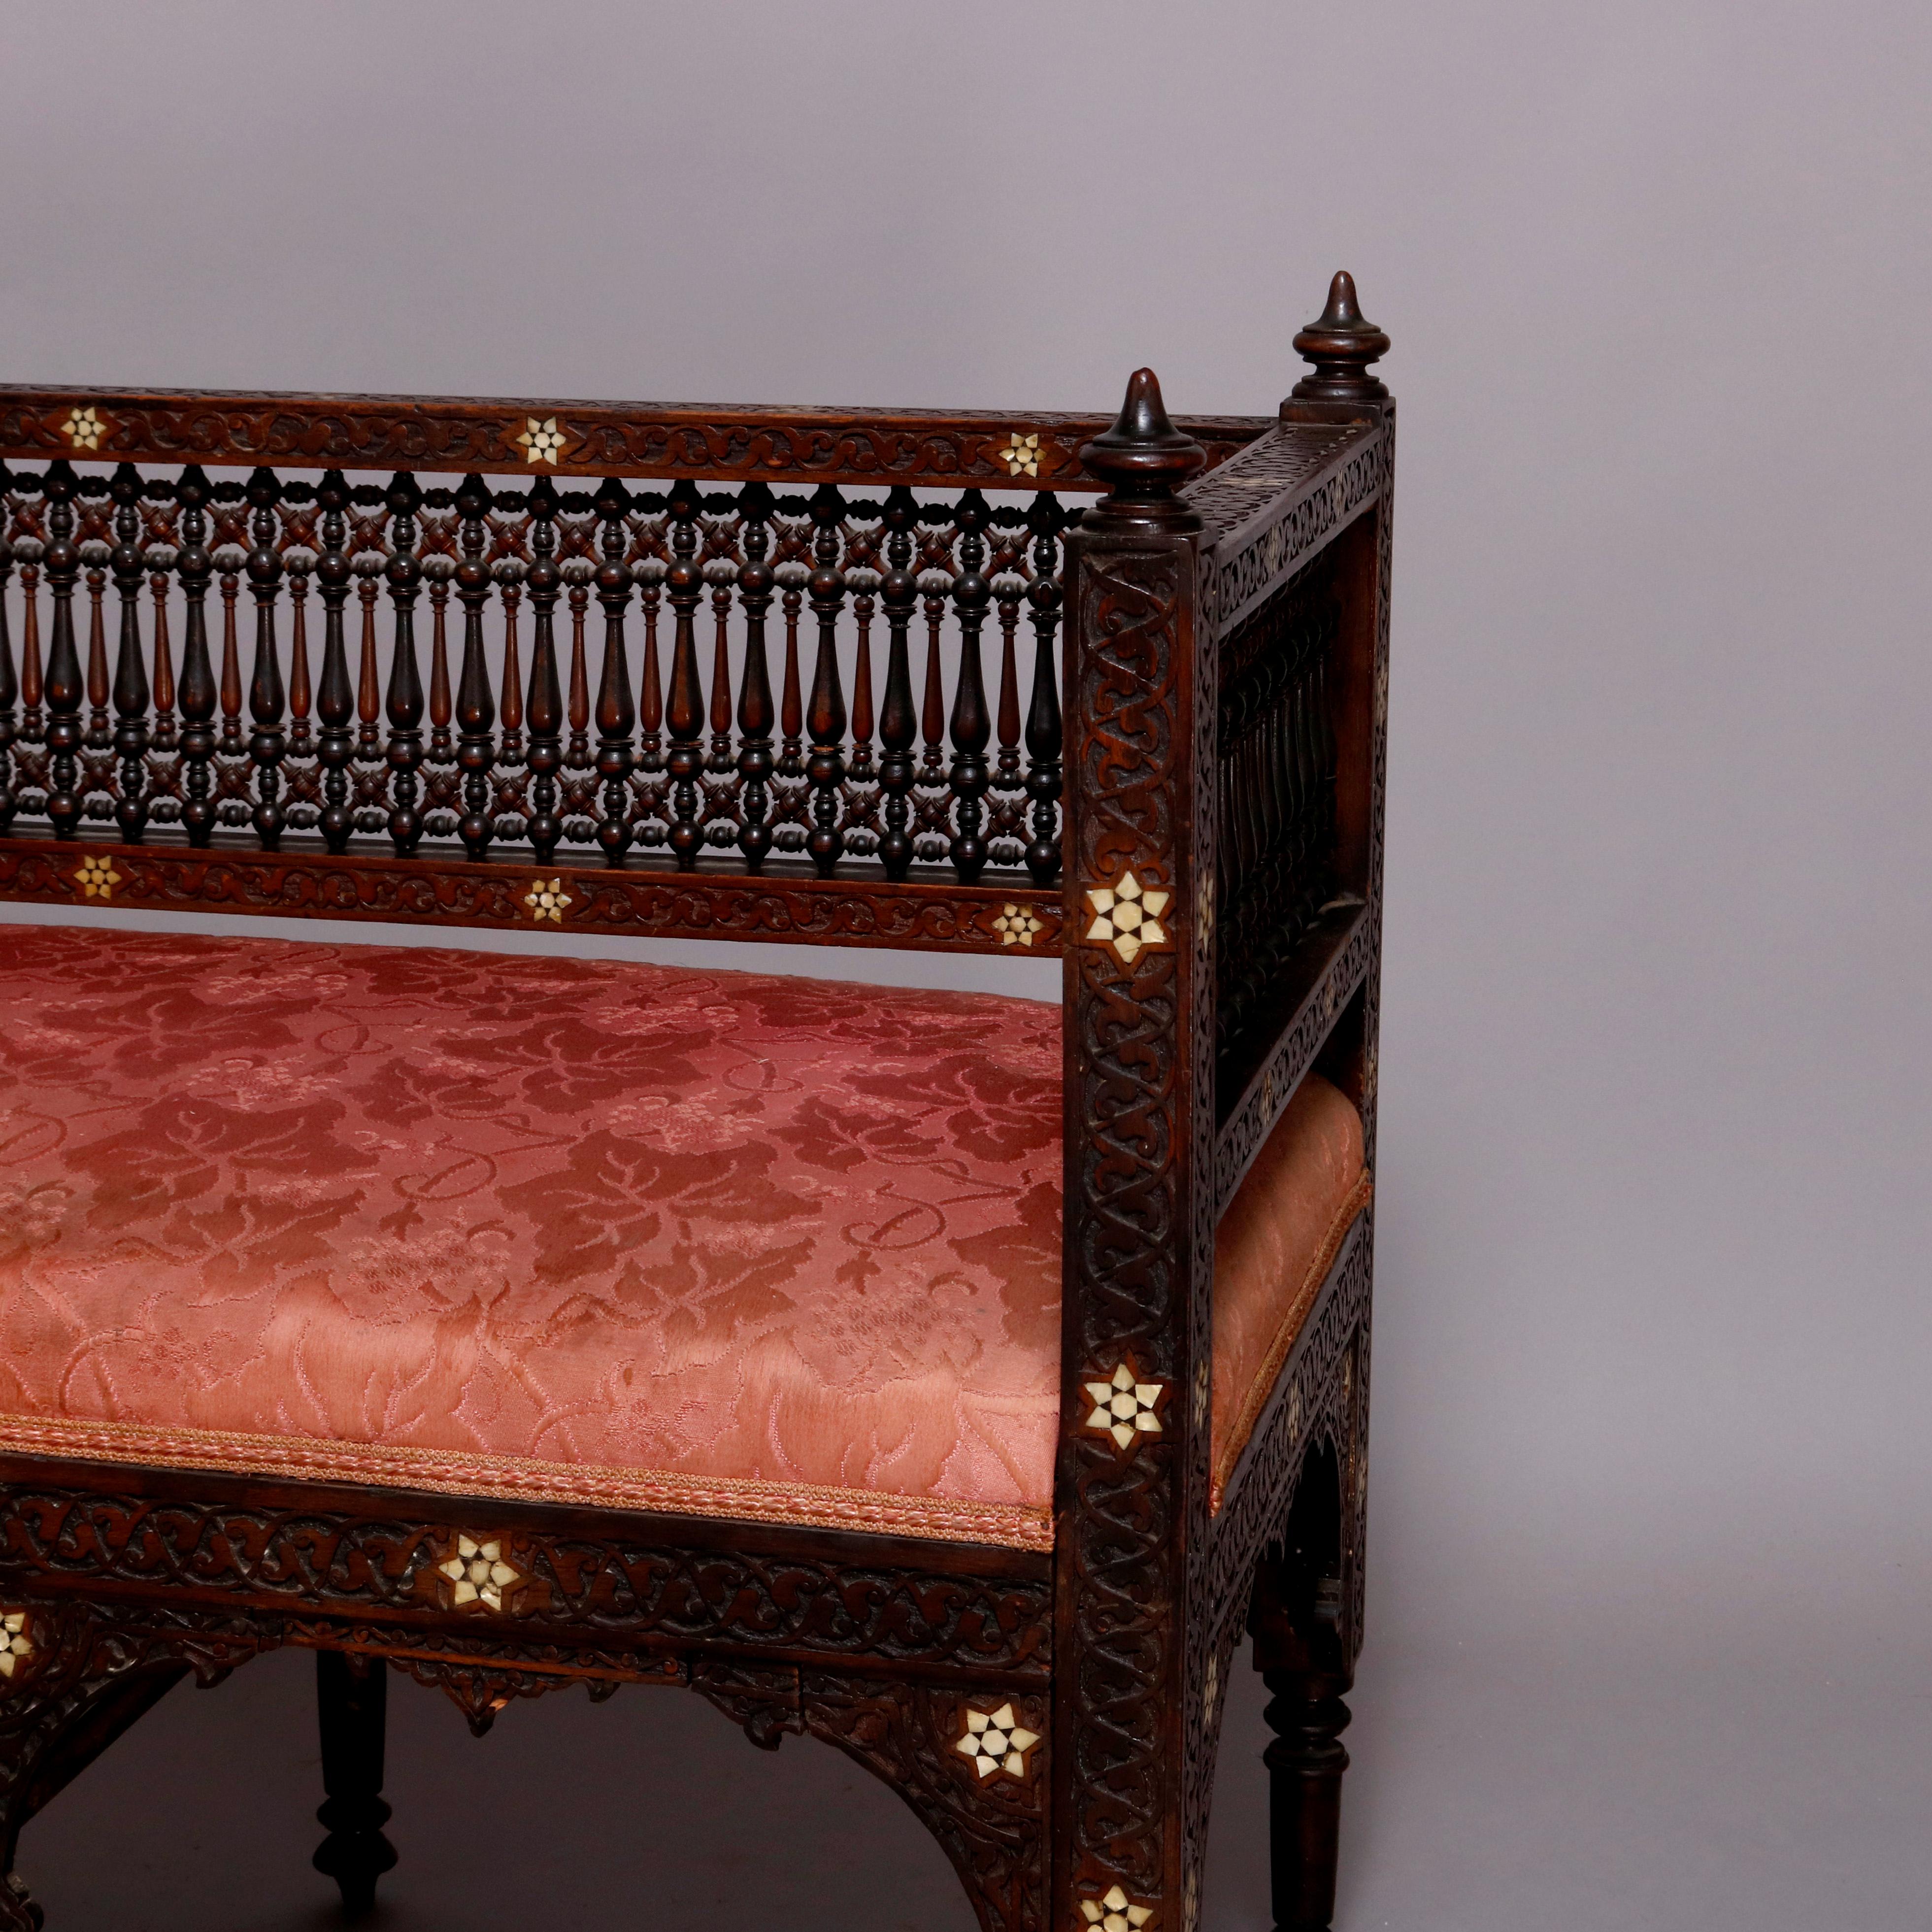 Syrian Orientalist Mother of Pearl Inlaid & Carved Hardwood Settee 19th Century 4